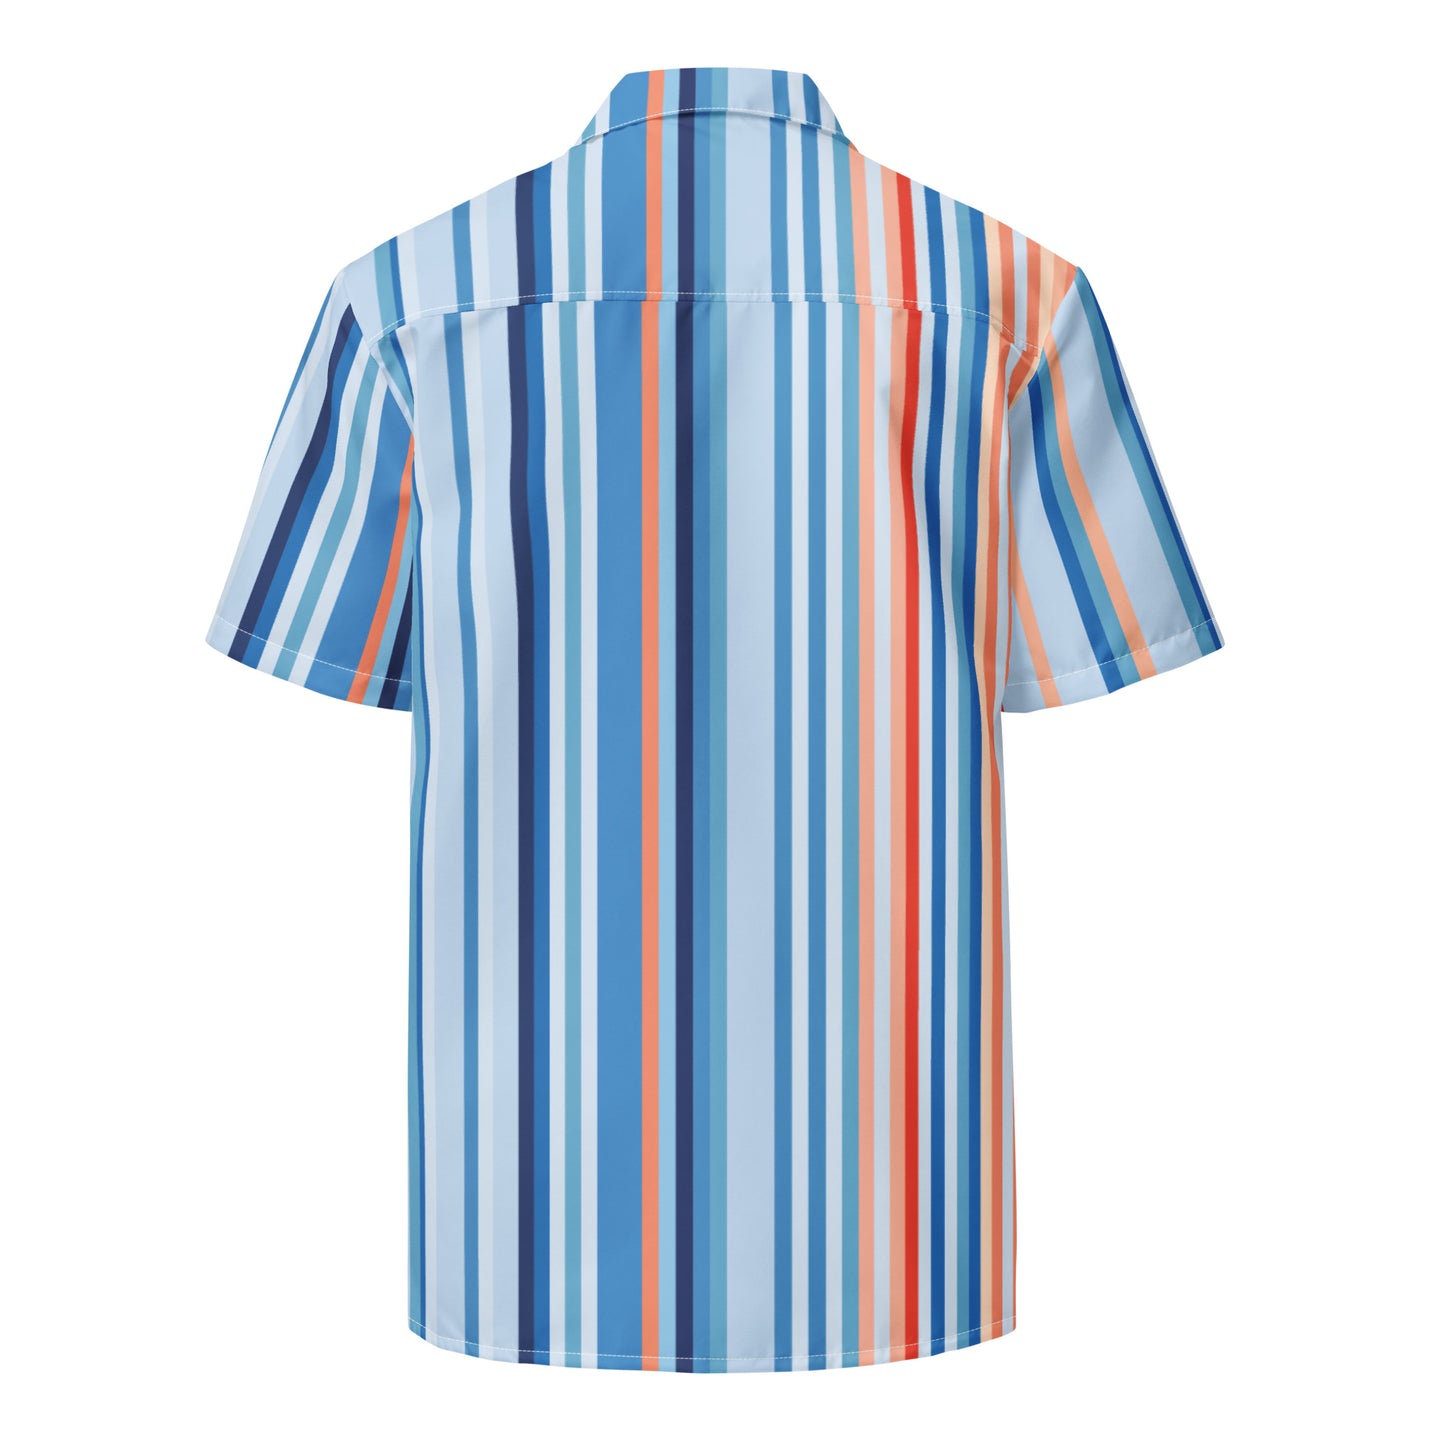 Climate Change Global Warming Stripes - Sustainably Made Unisex button shirt vertical